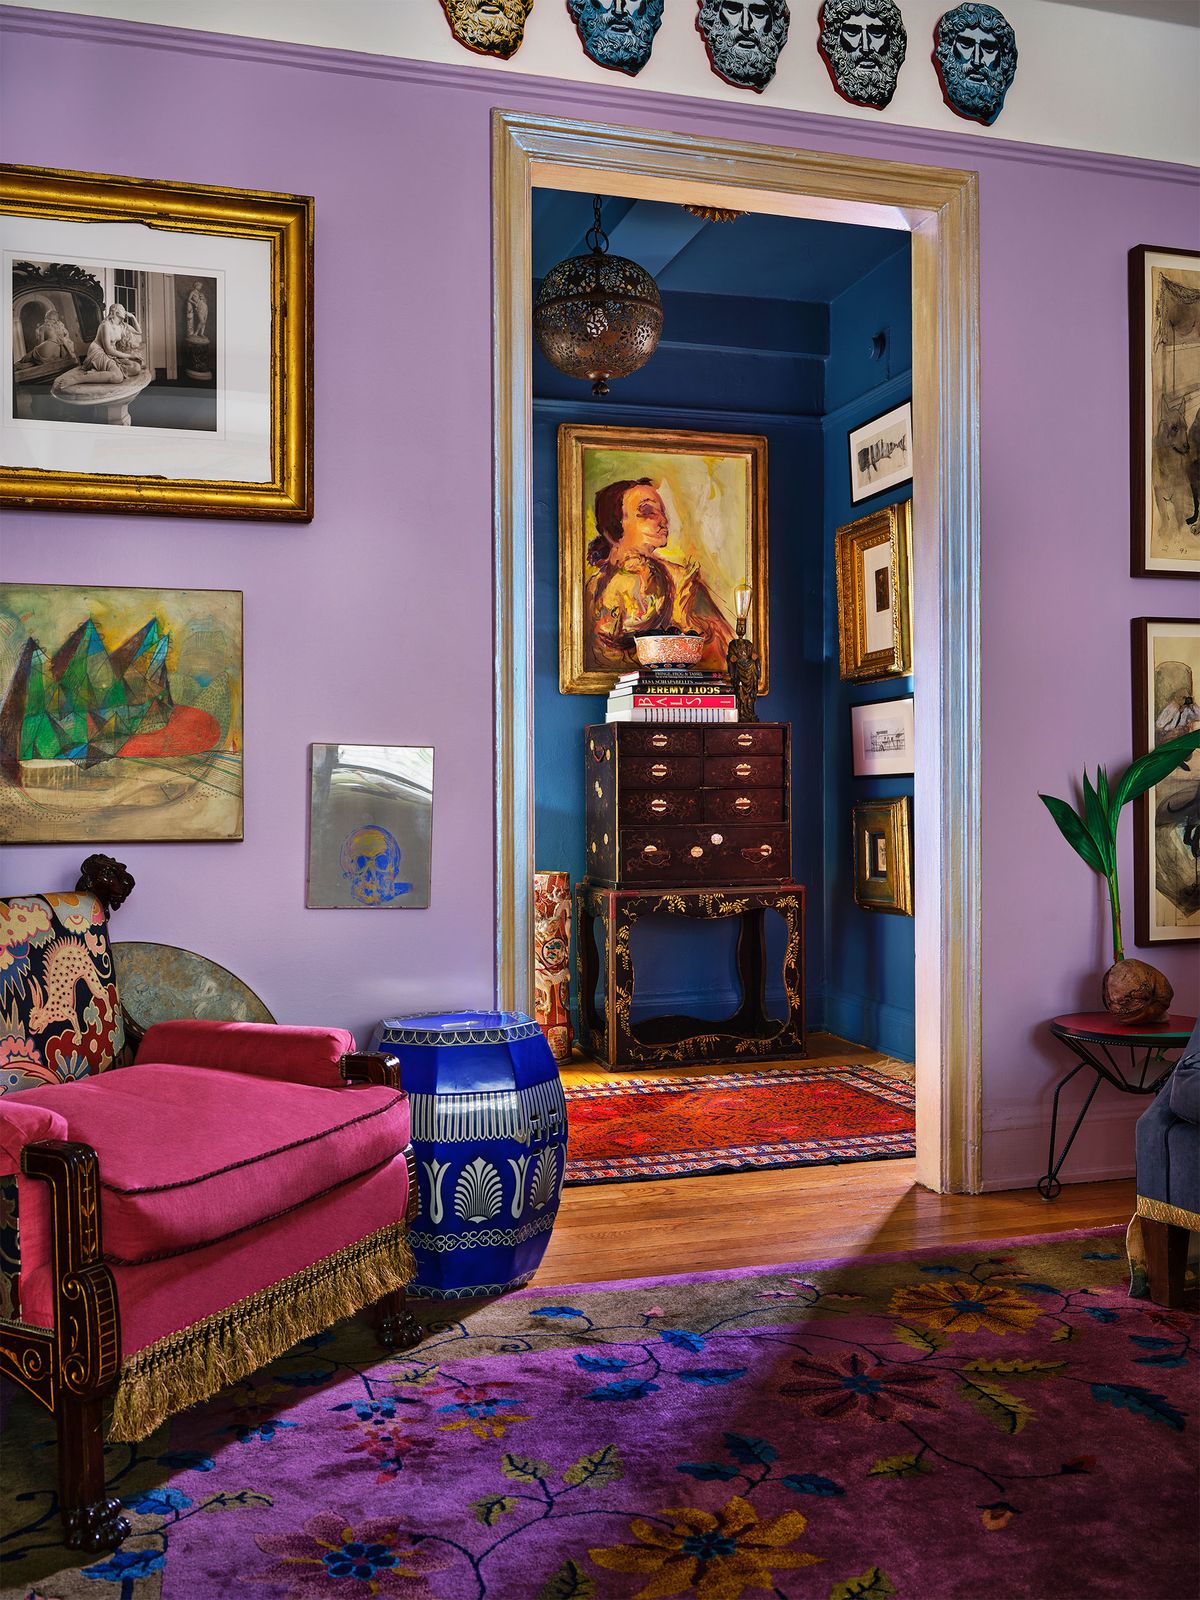 living area with a purple print rug, lilac colored walls, a magenta victorian chair, and blue antique side table, also a view into the entry all with deep blue walls, antique japanese cabinet, and paintings on walls